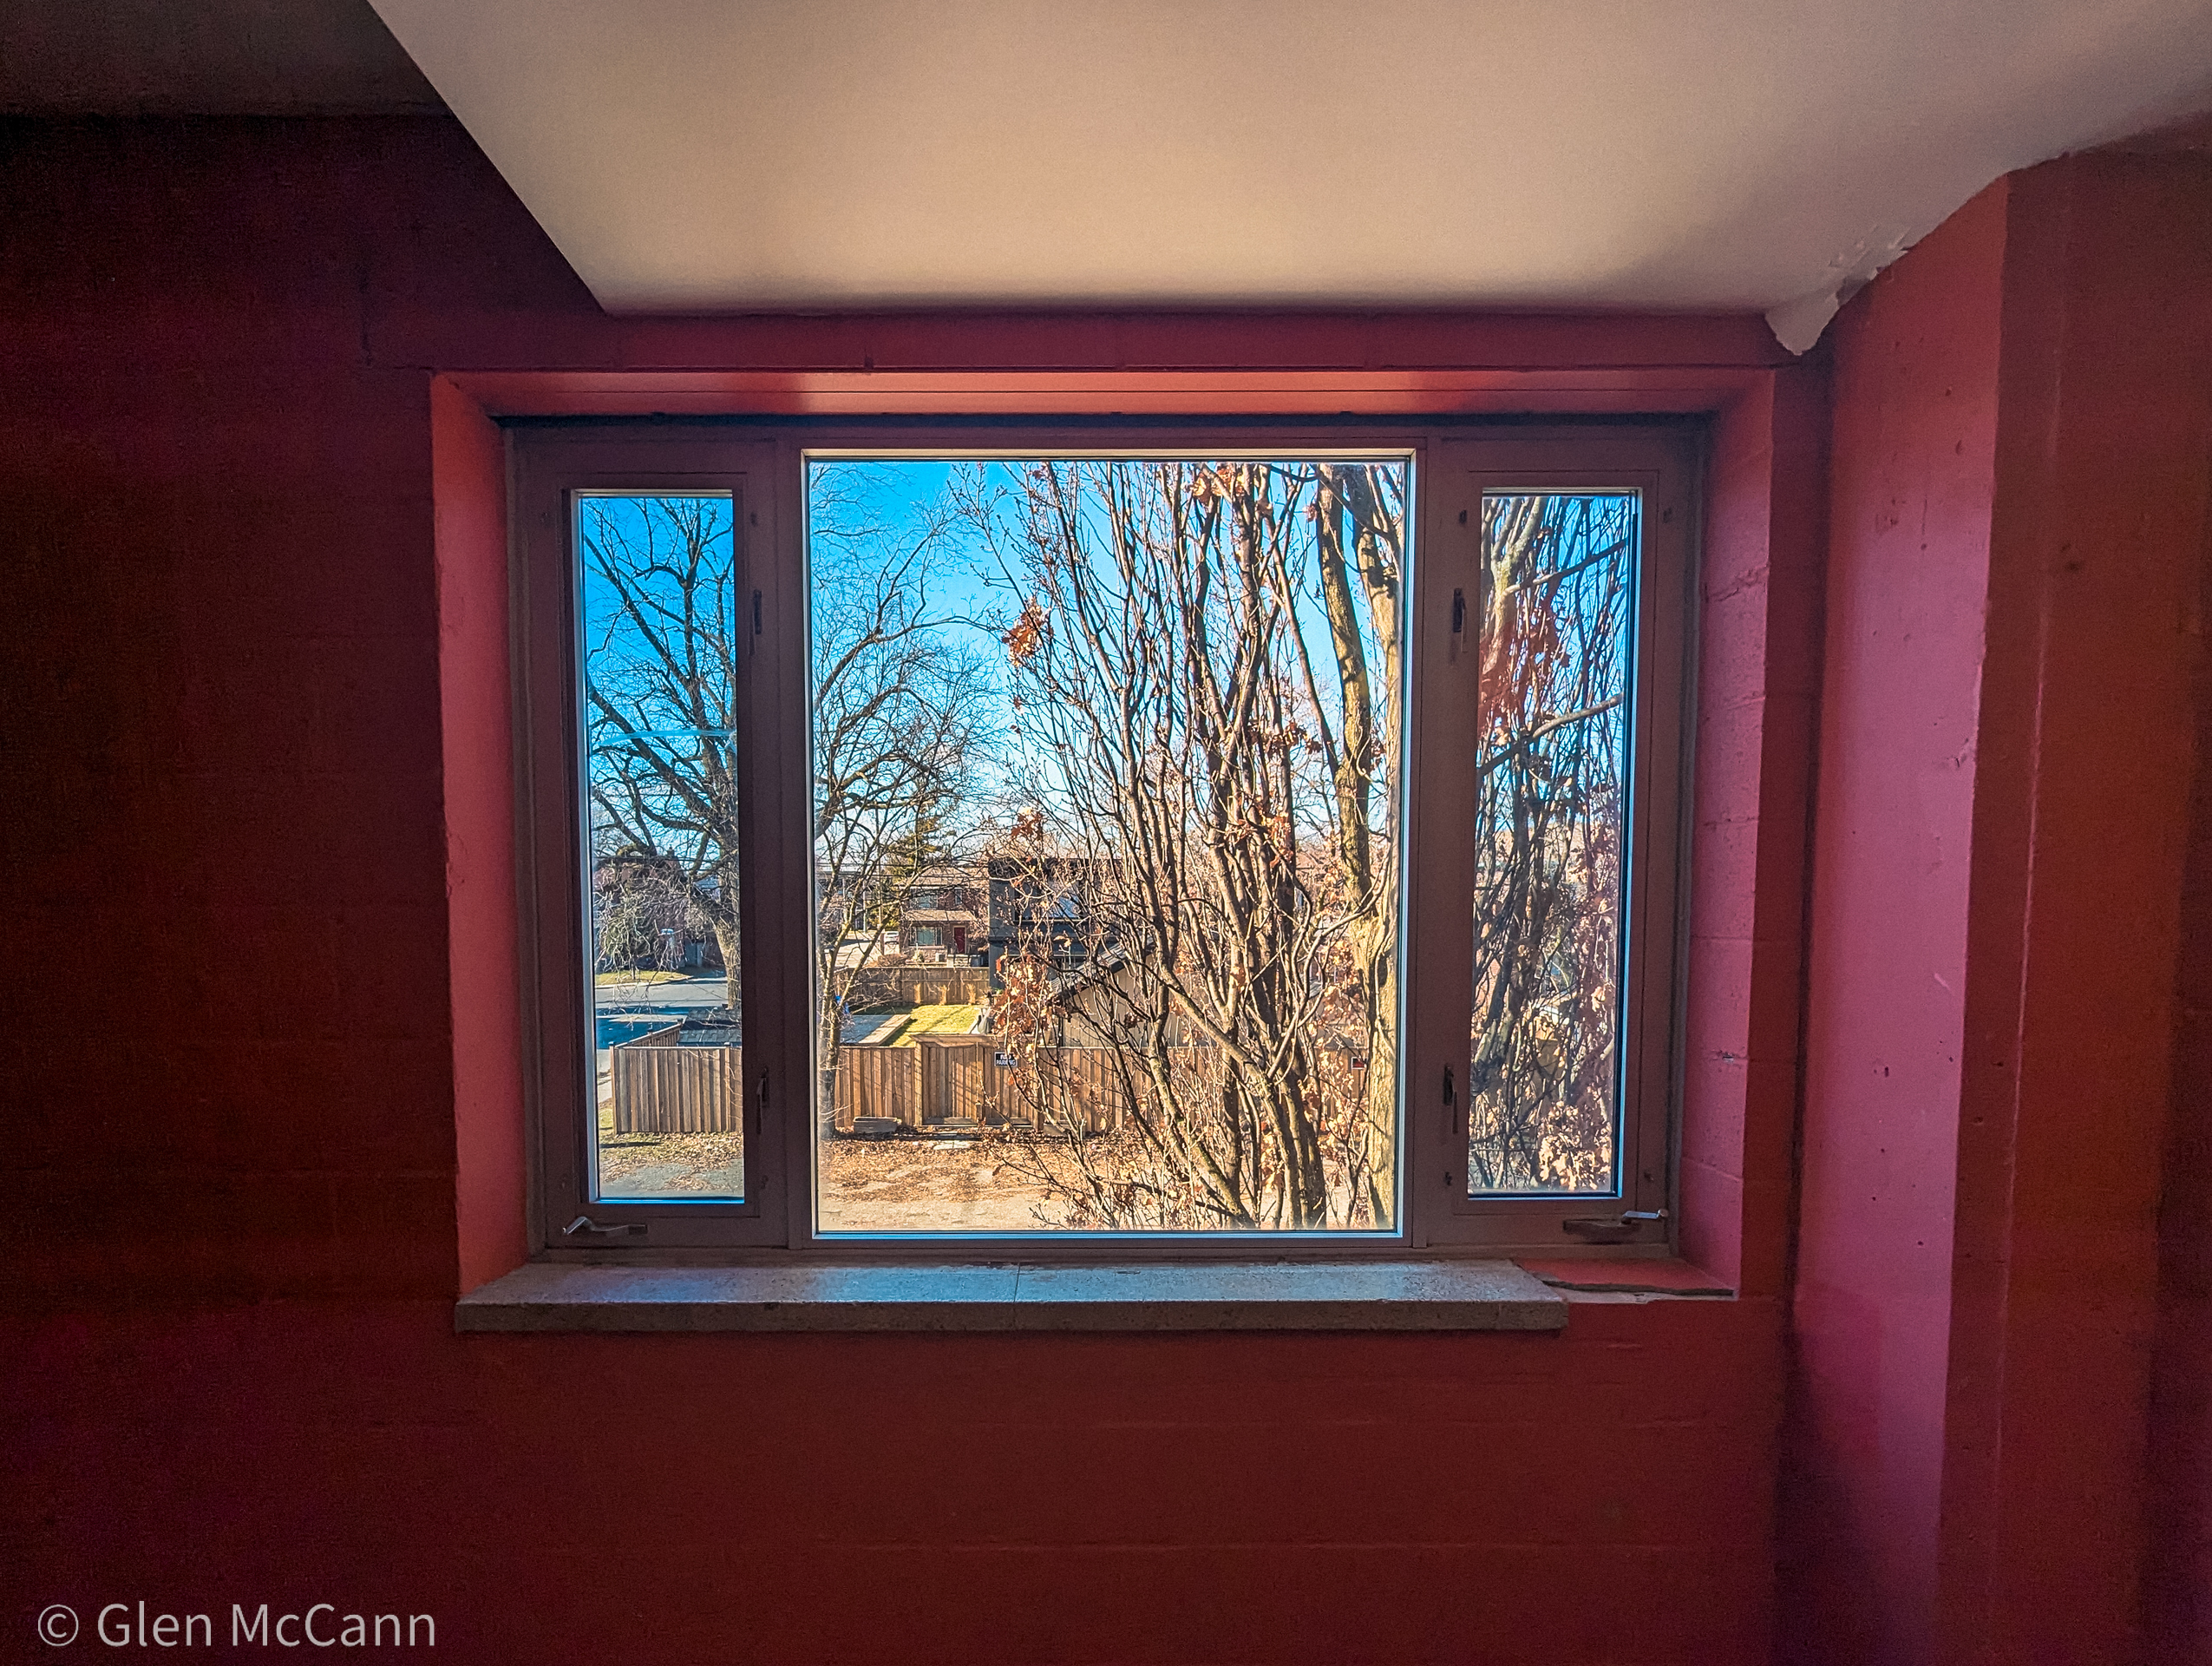 Interior photo of a window looking out to a bright spring day, surrounded by red walls.